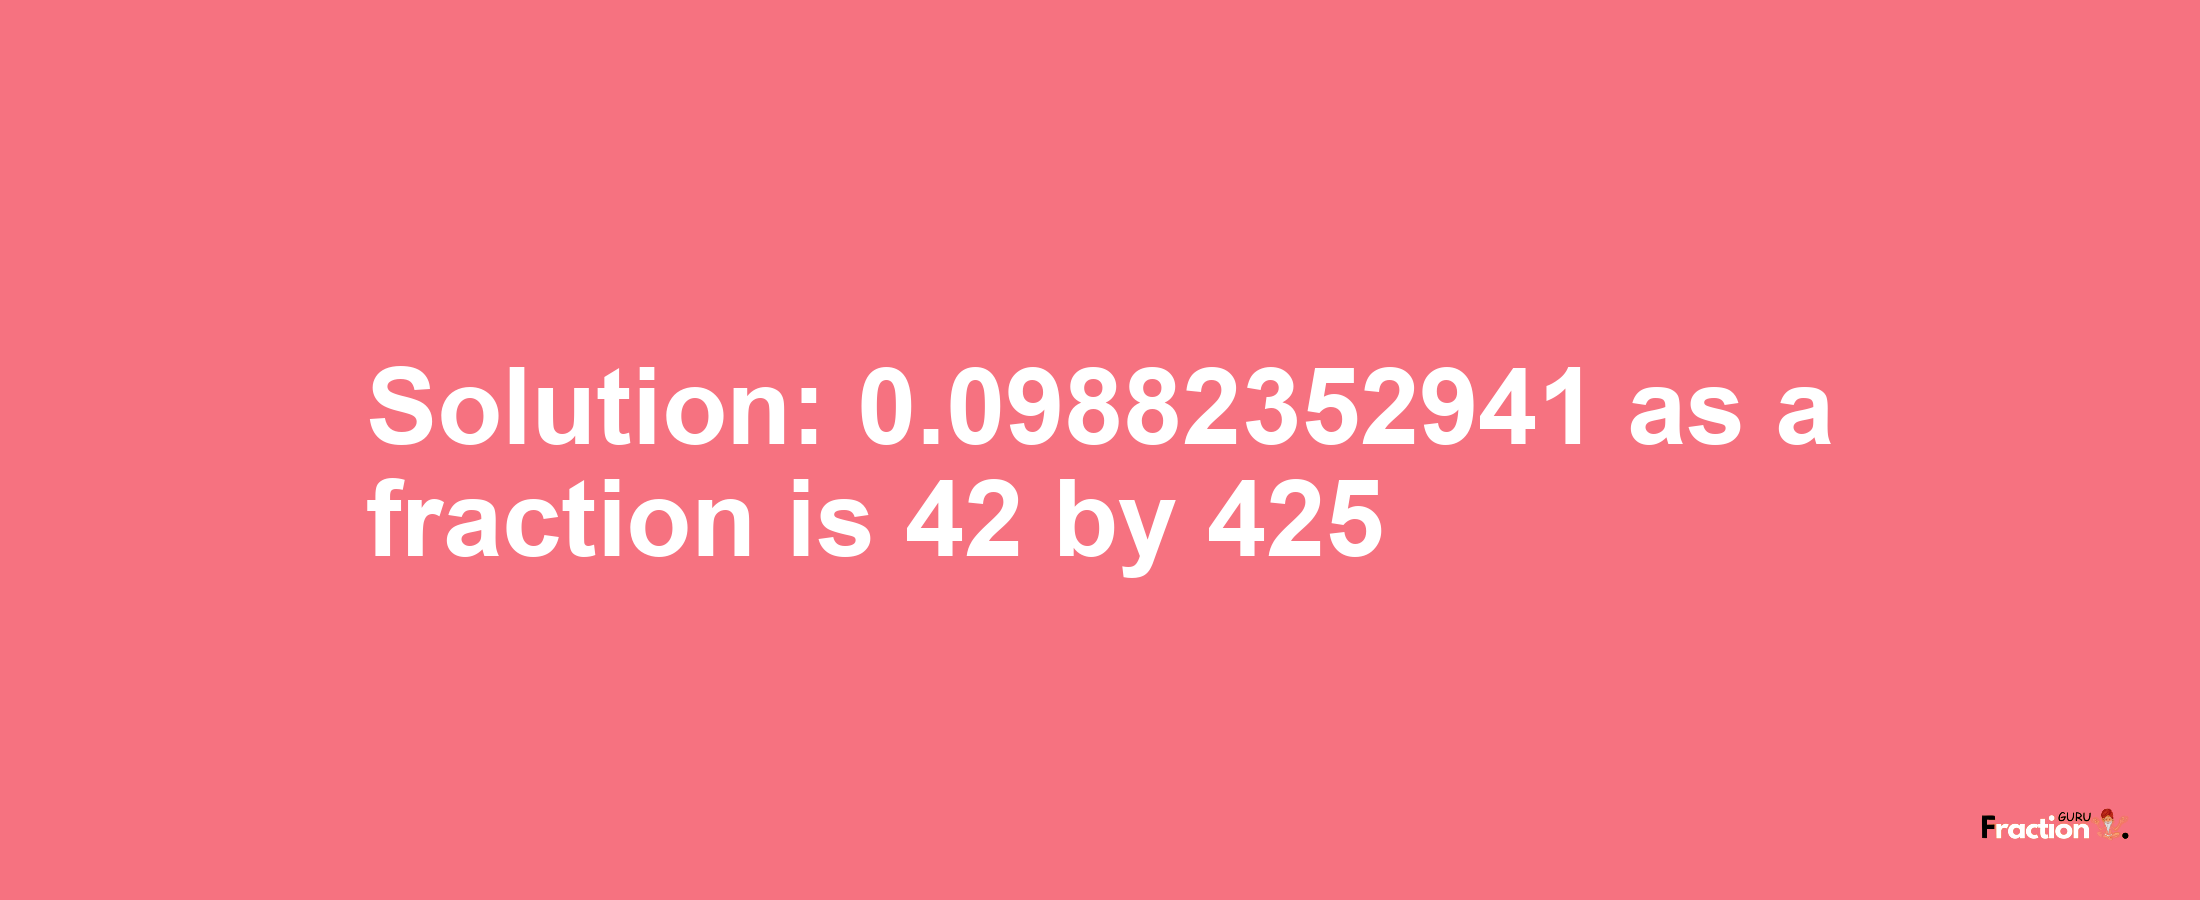 Solution:0.09882352941 as a fraction is 42/425